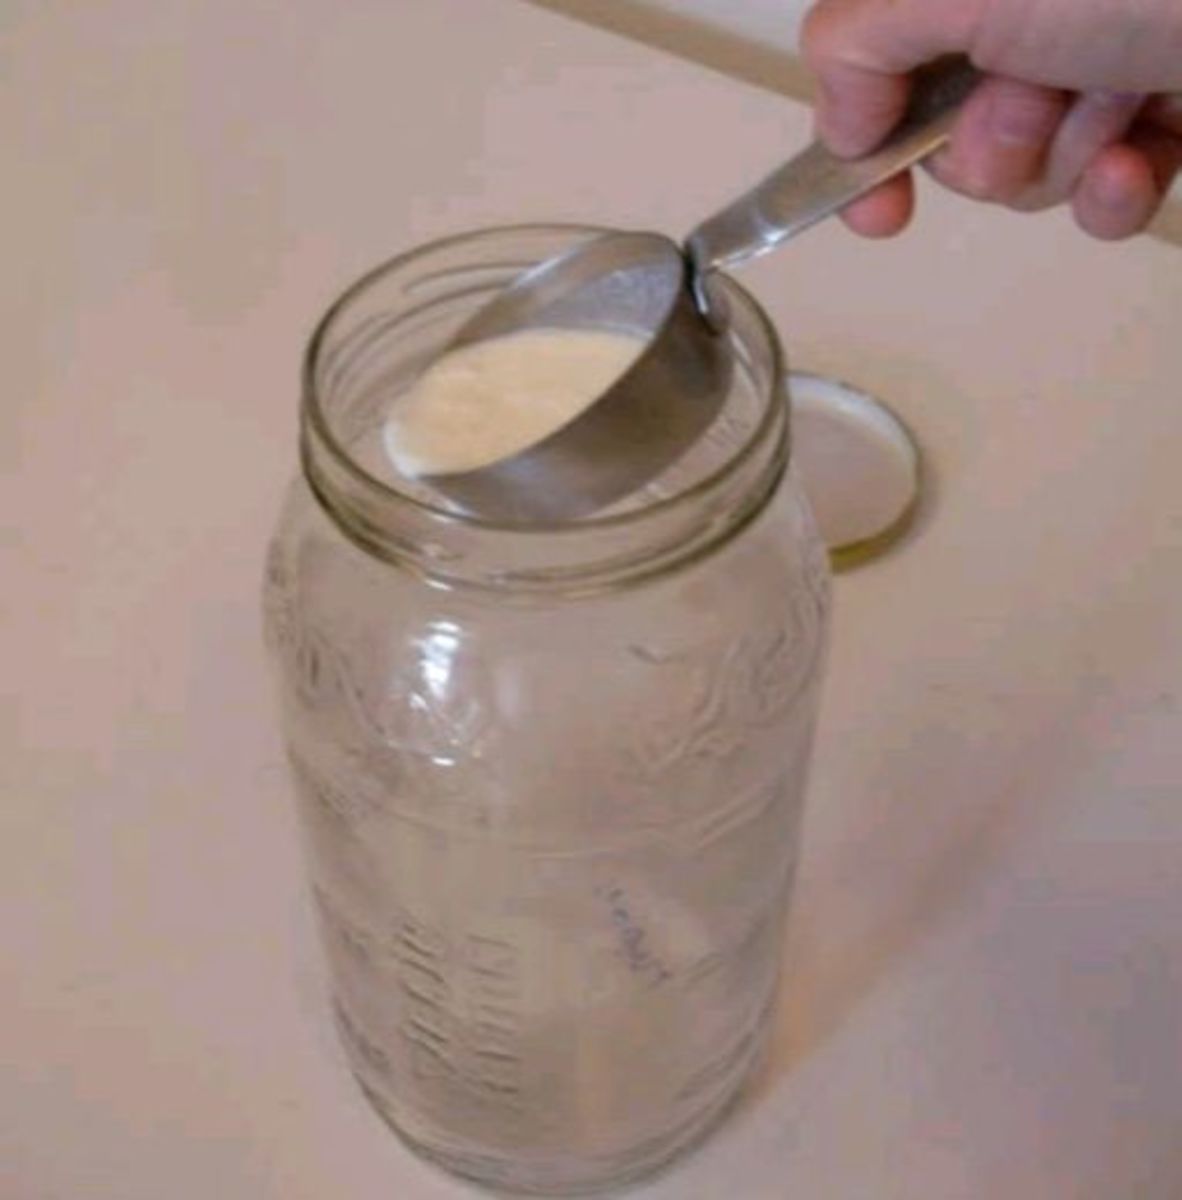 Measure about 1 tablespoon of yogurt per quart of milk, and pour into the bottom of your container.